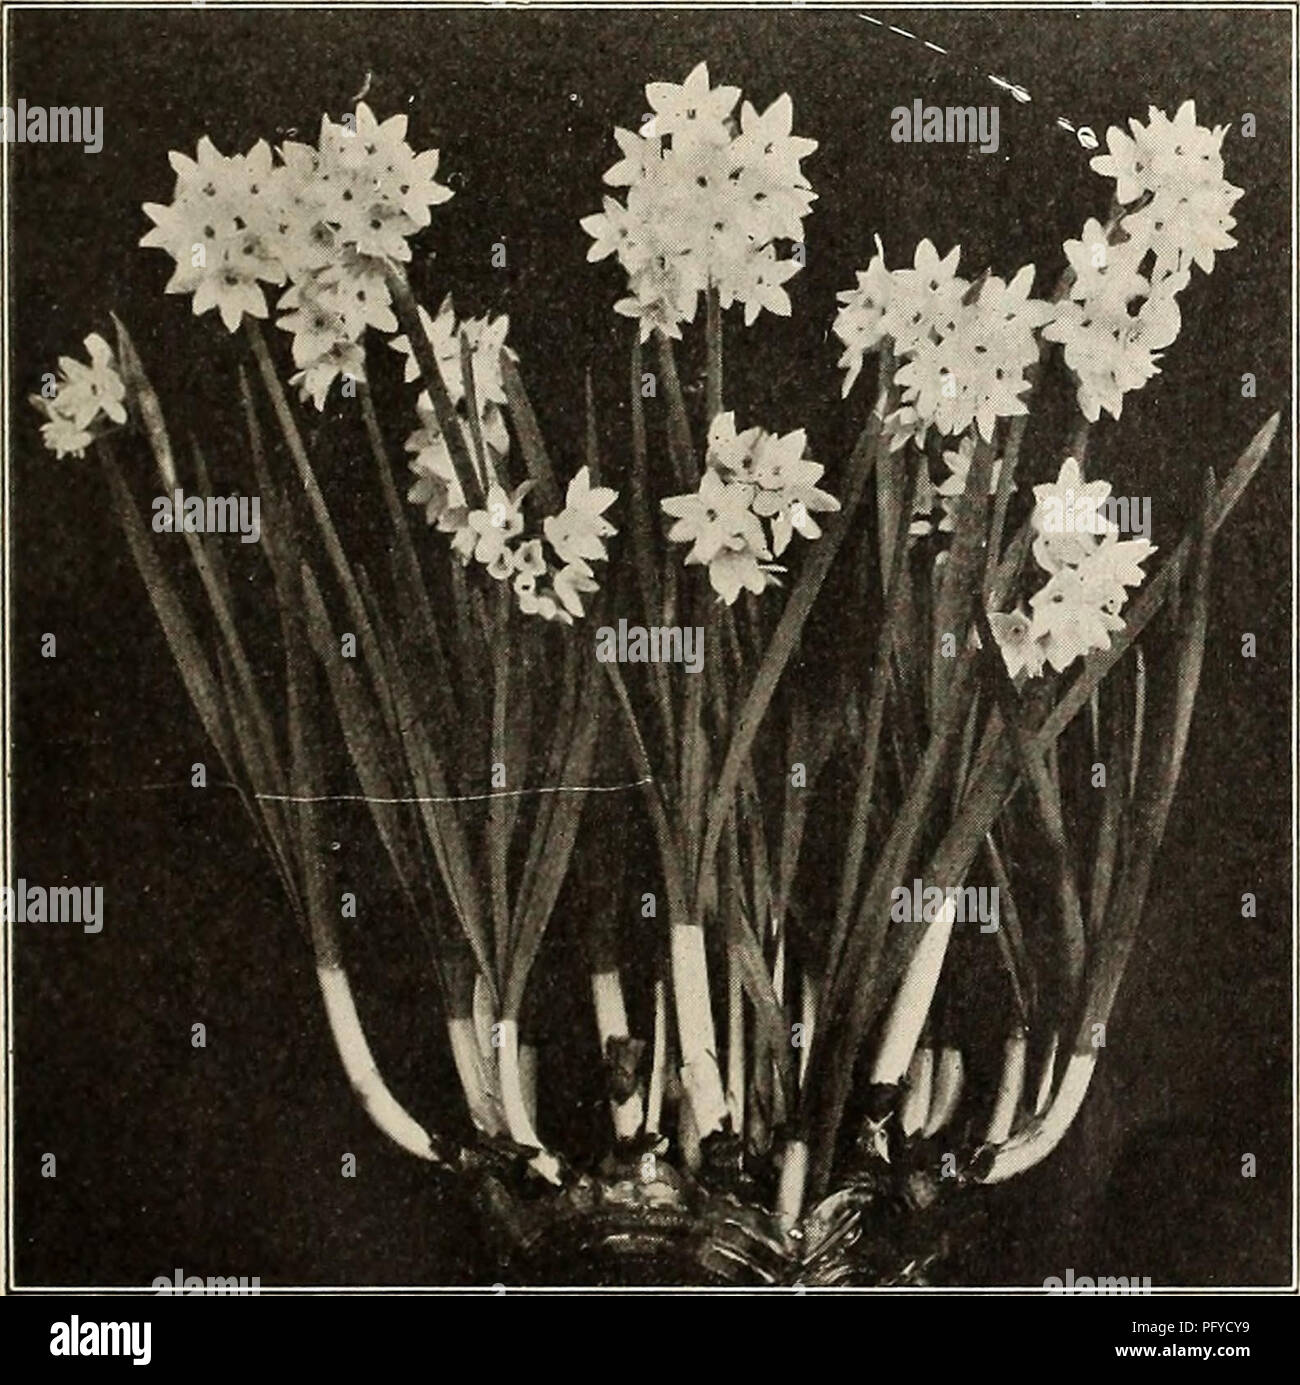 . Currie's bulbs and plants : autumn 1911. Flowers Seeds Catalogs; Bulbs (Plants) Seeds Catalogs; Nurseries (Horticulture) Catalogs; Plants, Ornamental Catalogs. CURRIE BROS. CO., AUTUMN CATALOGUE, 1911 DOUBLE NARCISSUS DAFFODILS. While the double daffodils are not considered as attractive as the large flowering single trumpet sorts, they are no less desir- able, and are especially adapted for naturalizing in odd corners, being perfectly hardy, and will thrive and increase for many years. VON SIOIV (True Dutch)—Rich golden yellow, the finest of all double yellow Daffodils, used extensively for Stock Photo